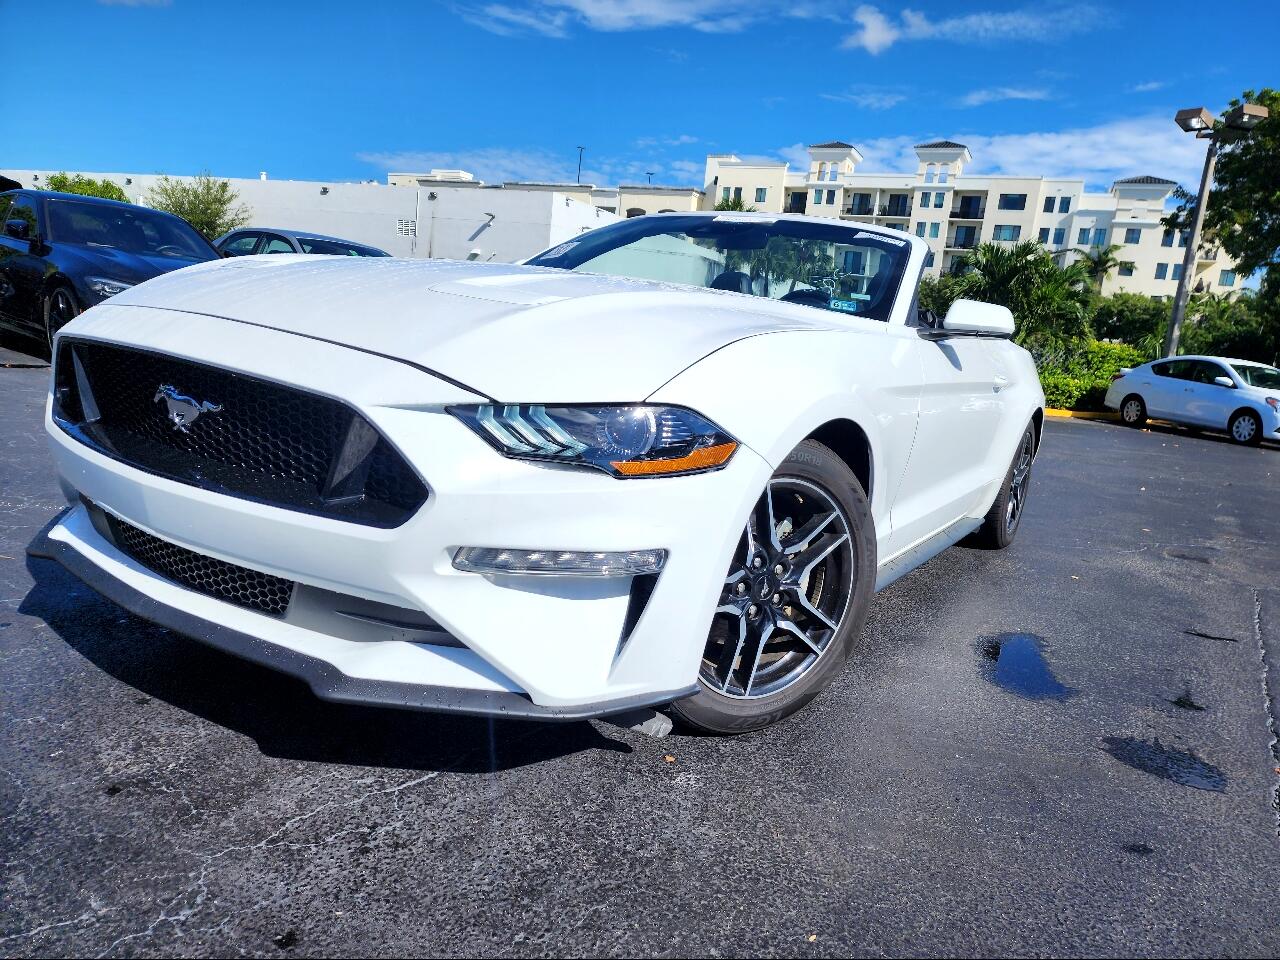 2022 FORD Mustang Convertible - $26,999